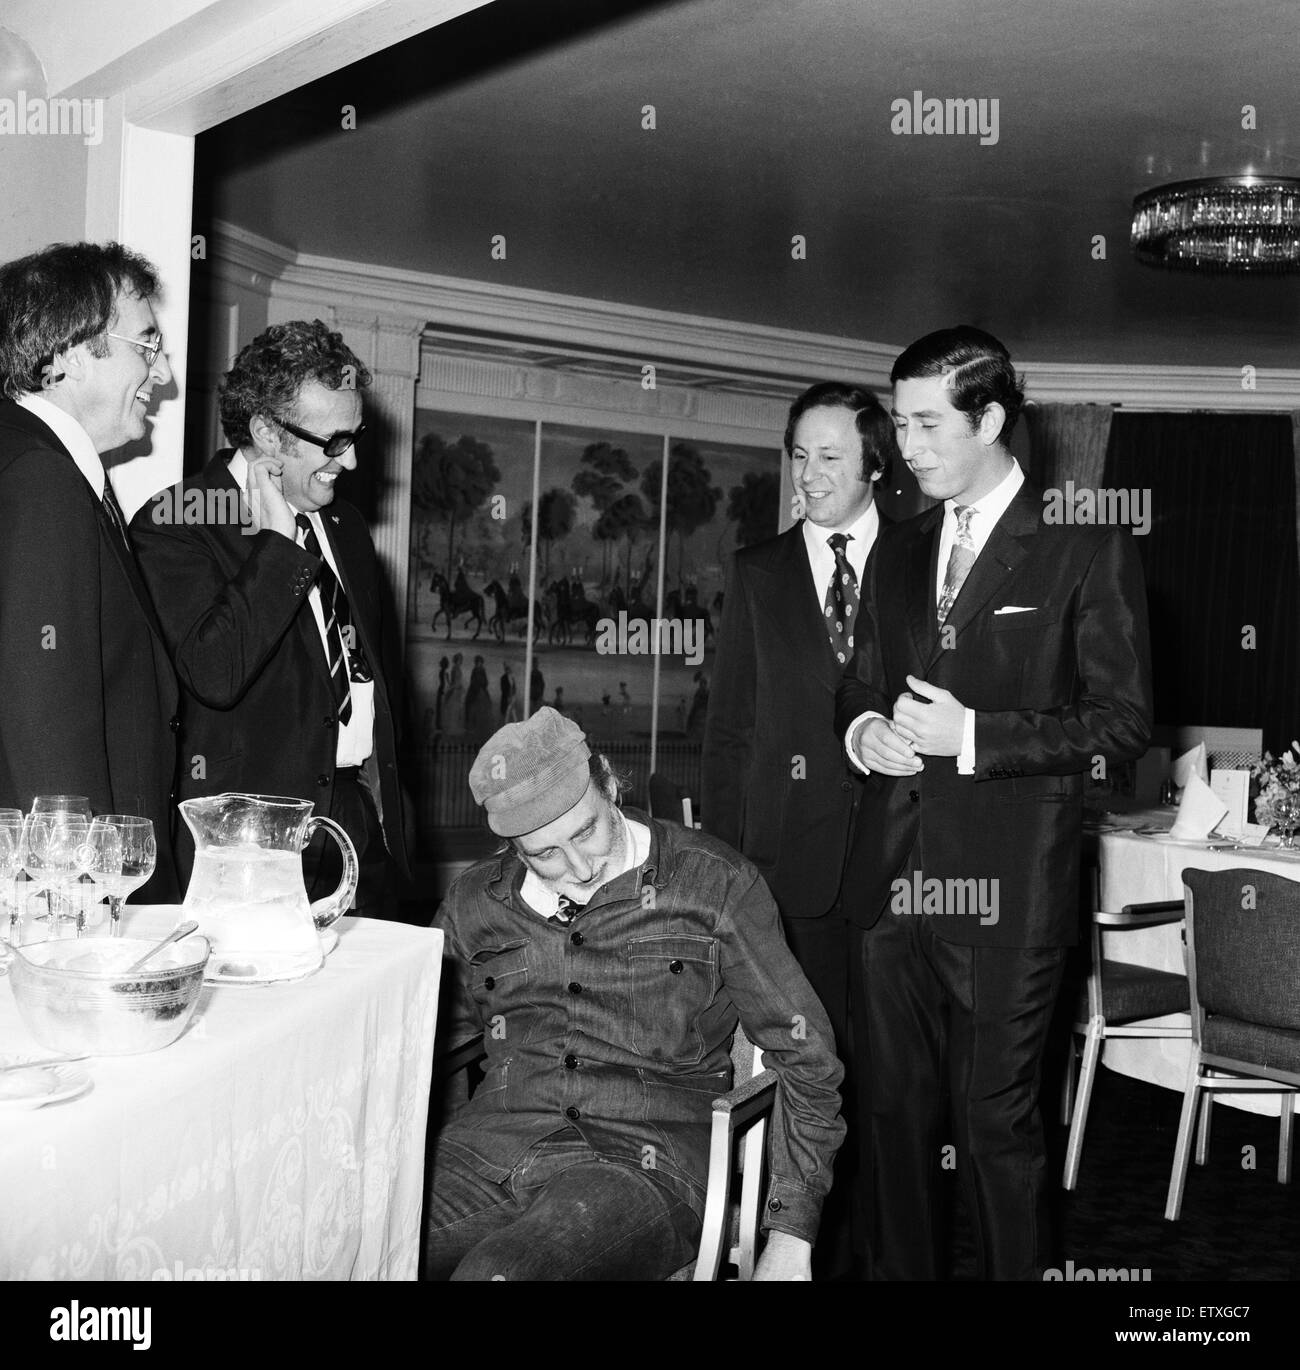 Prince Charles dines with The Goons at The Dorchester, London. Spike Milligan, Peter Sellers and Michael Bentine greeted the Prince's arrival with cries and jokes. (Harry Secombe was at home ill). The Prince walks over to the Goons with Spike Milligan in Stock Photo